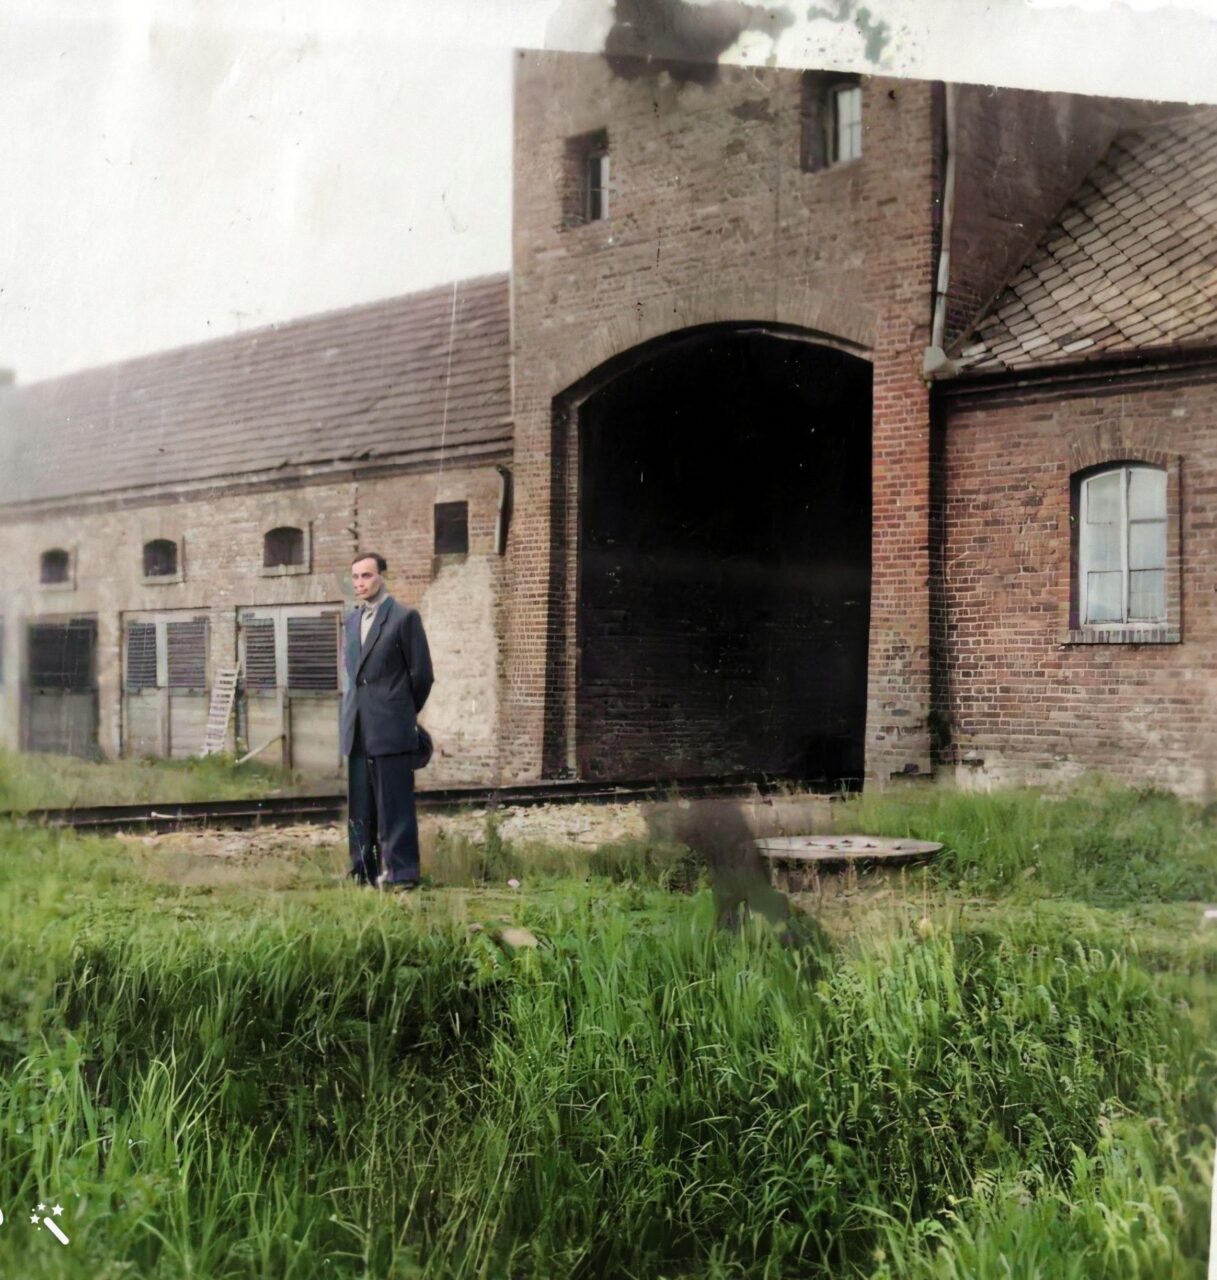 Image of Salomon Kupperman, a Holocaust survivor, in front of the gate of death in Birkenau in the late 1940’s. Photo courtesy of Elina Shaked